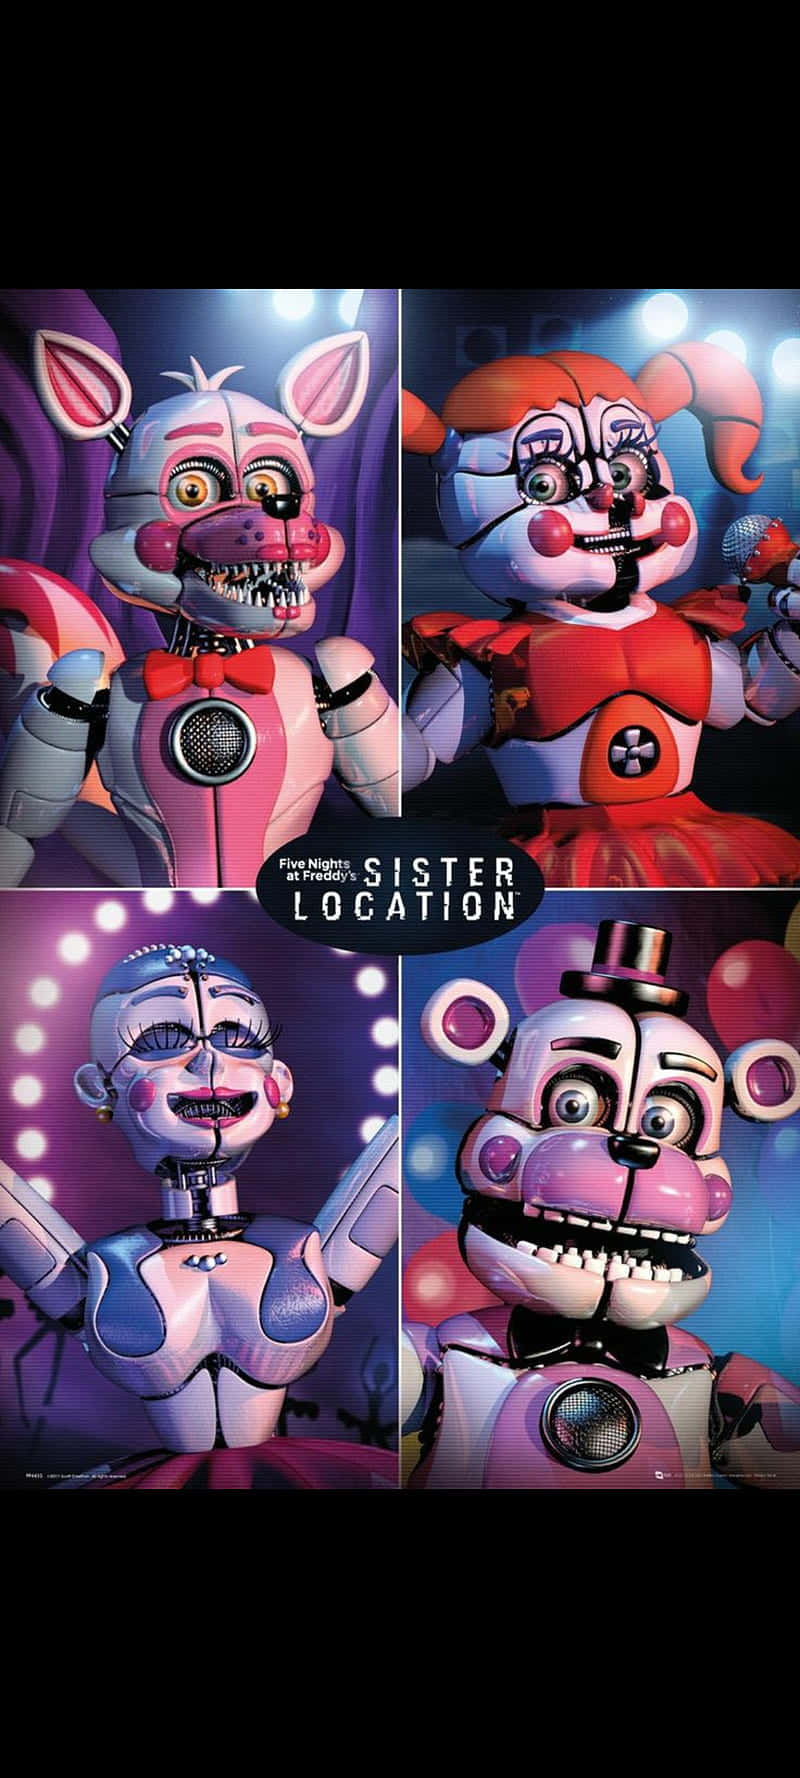 Five Nights At Freddy's: Sister Location Happy Wallpaper